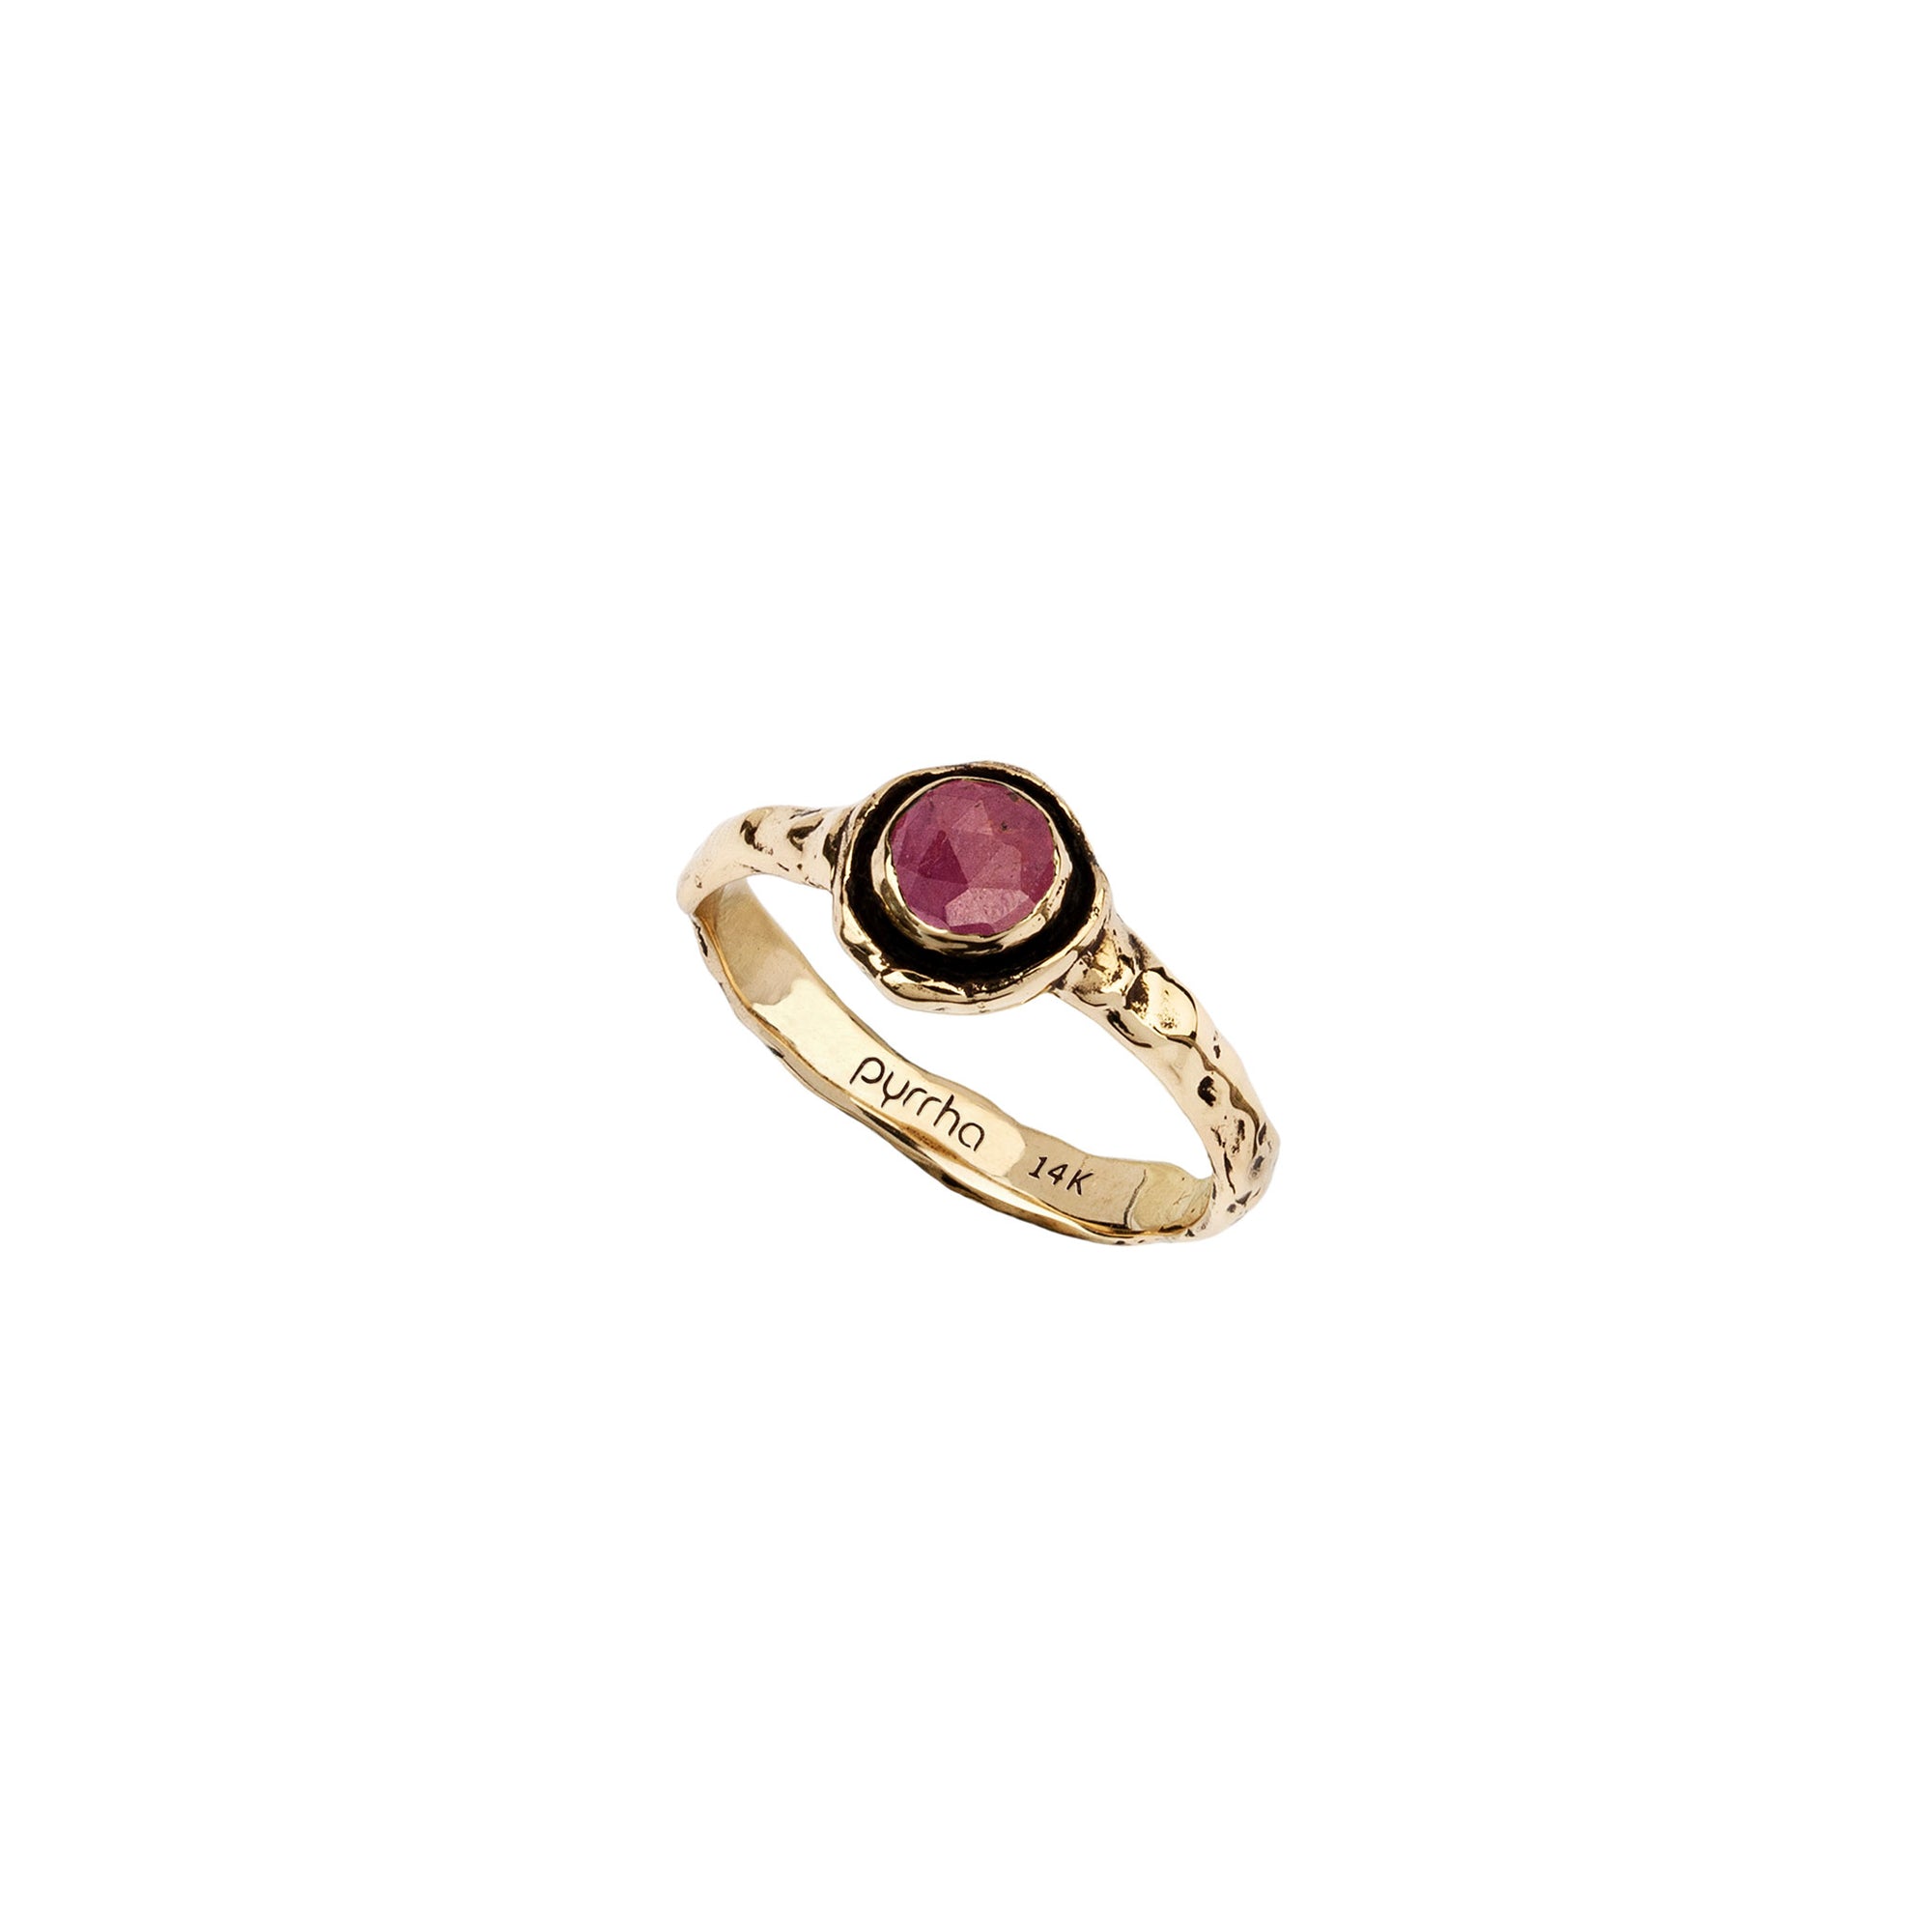 A narrow 14k gold ring set with a ruby.